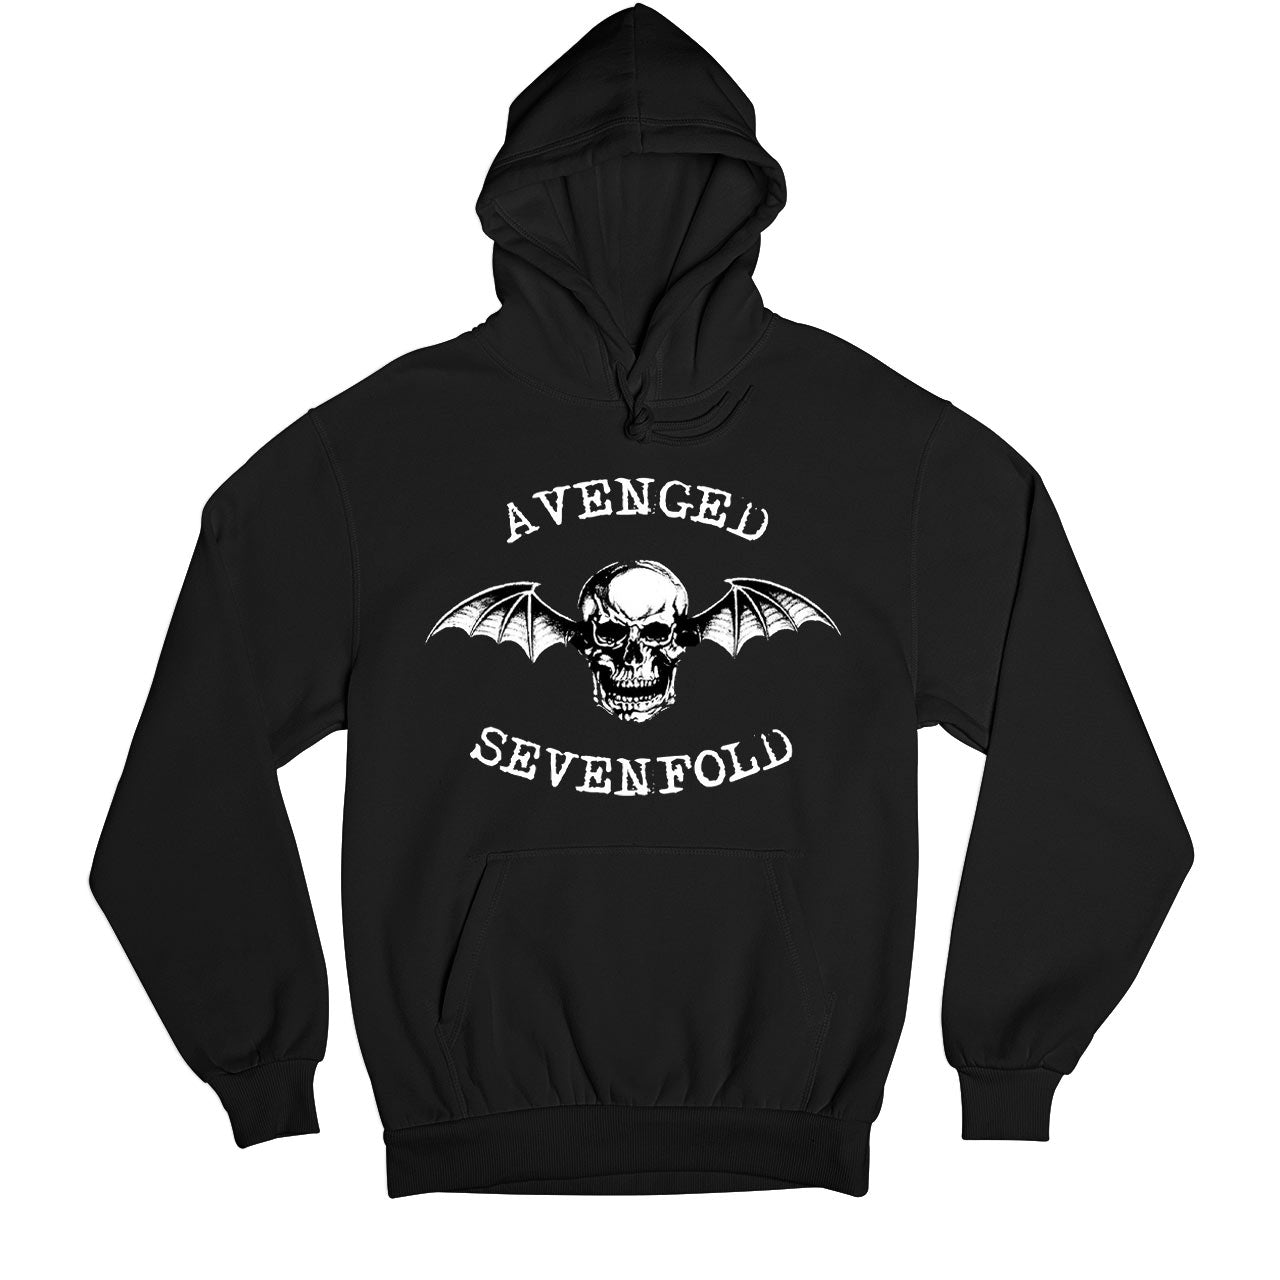 Avenged Sevenfold Hoodie - On Sale - XS (Chest size 38 IN)